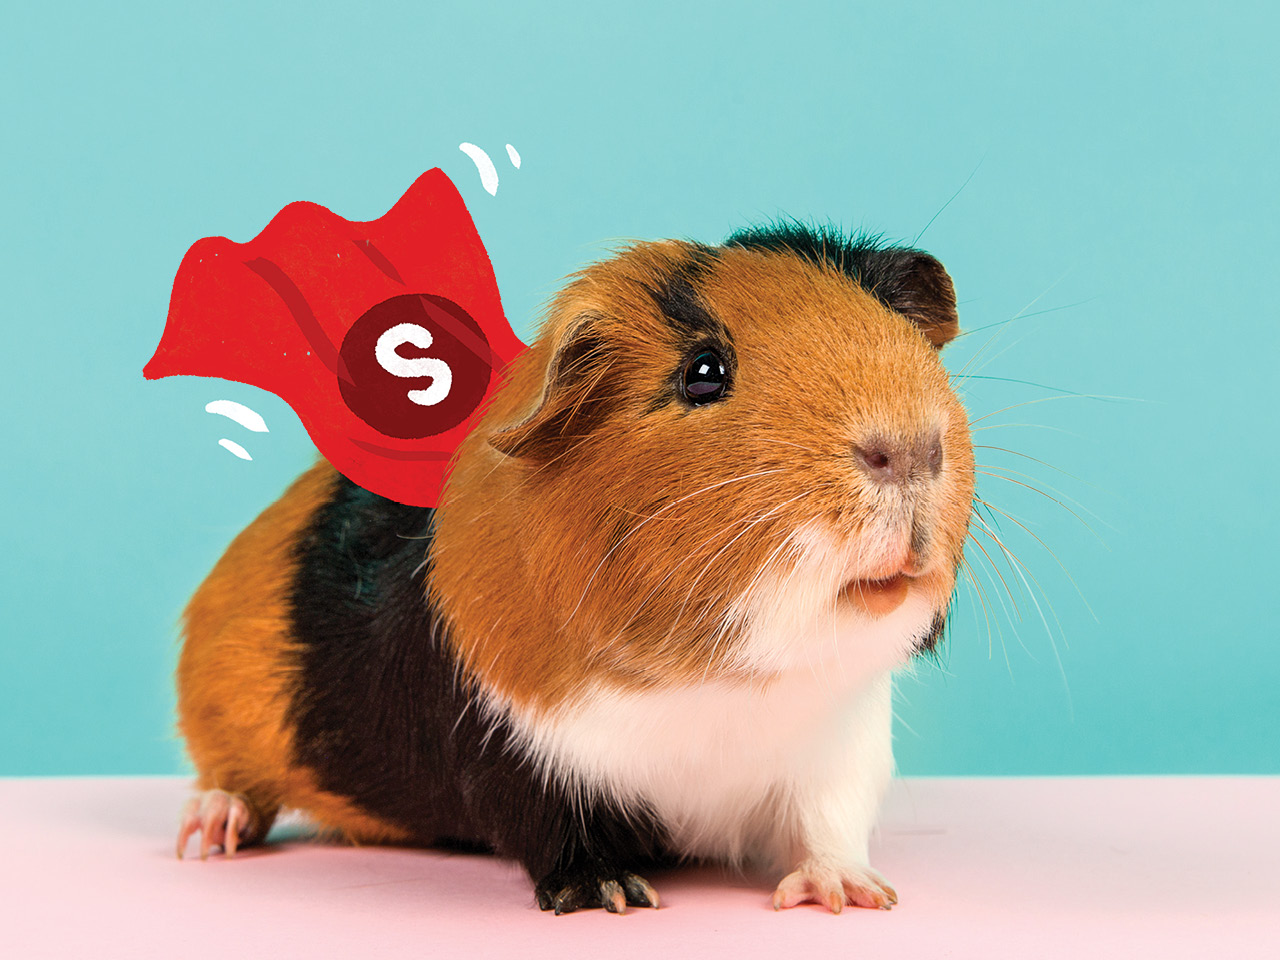 Black, brown and white guinea pig wears a red superhero cape